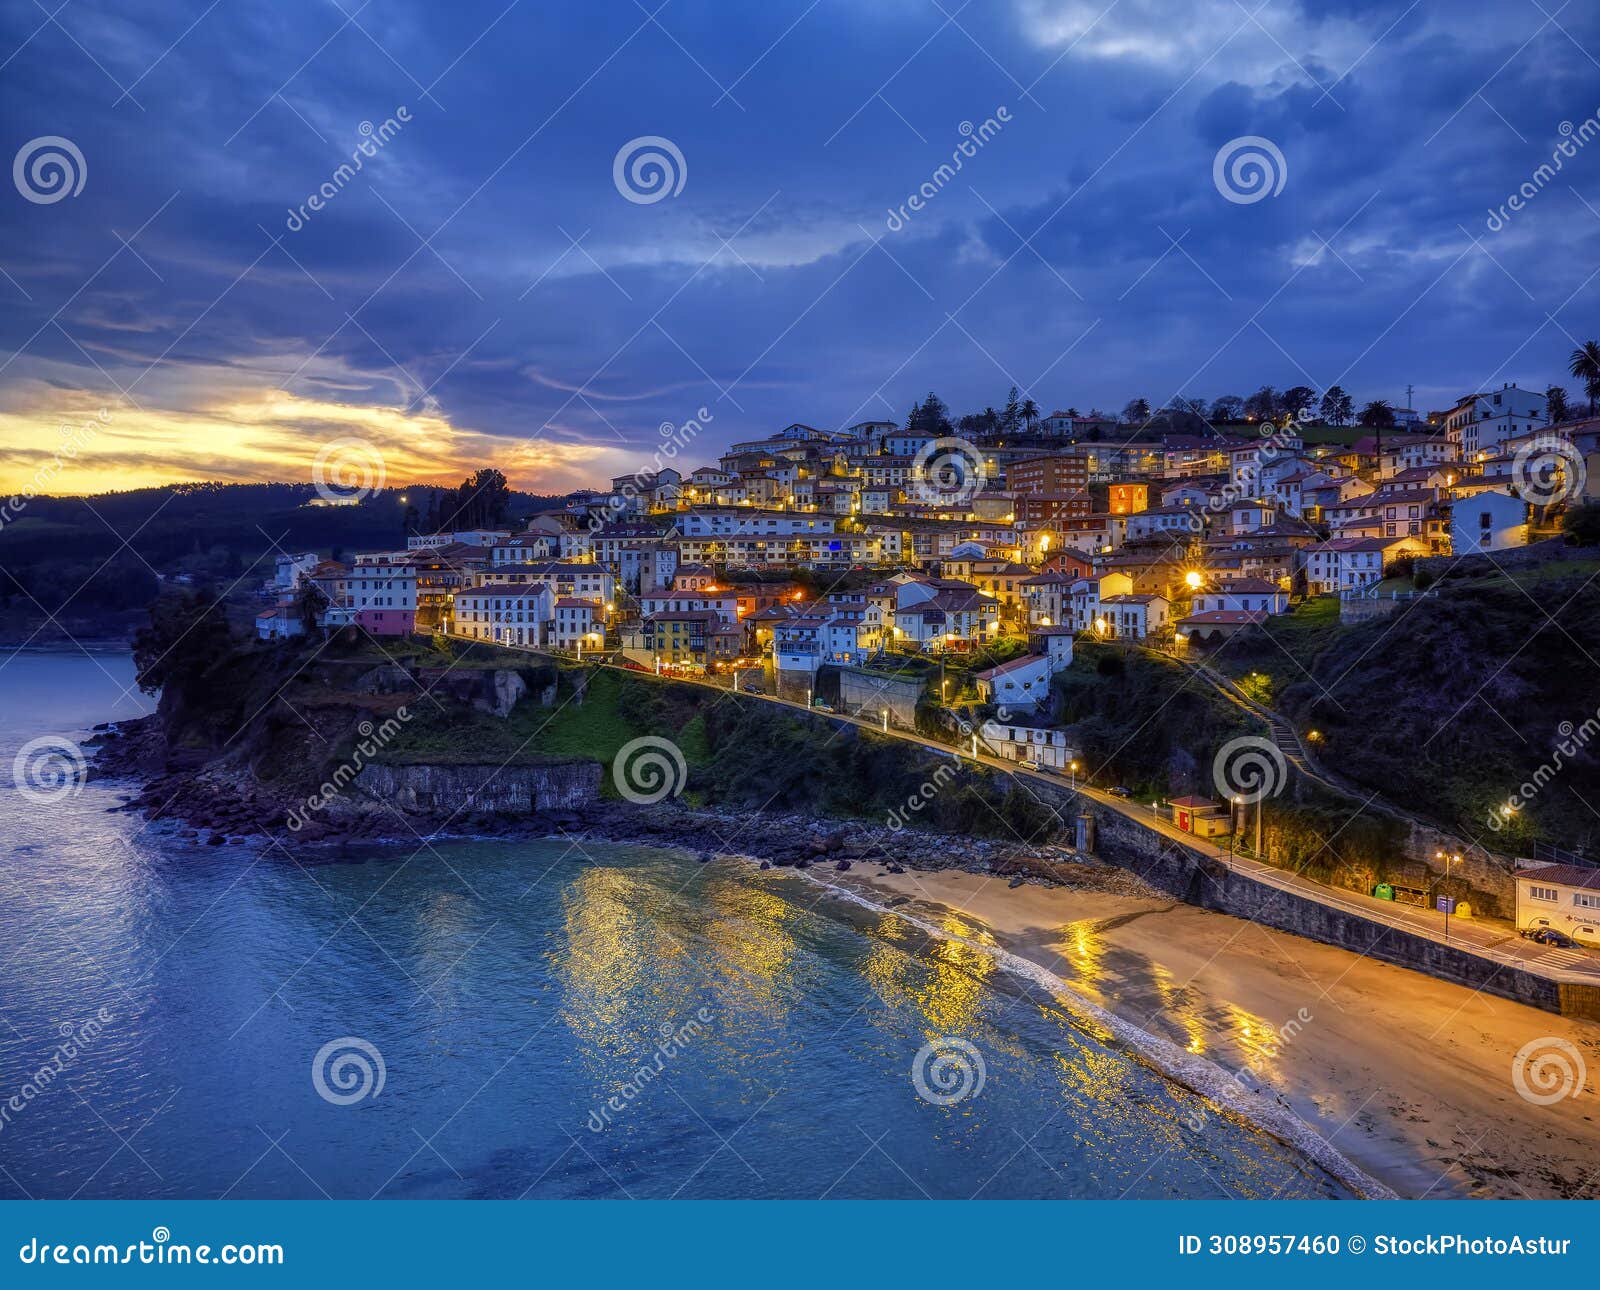 view of lastres, one of the most beautiful villages of cantabrian coast